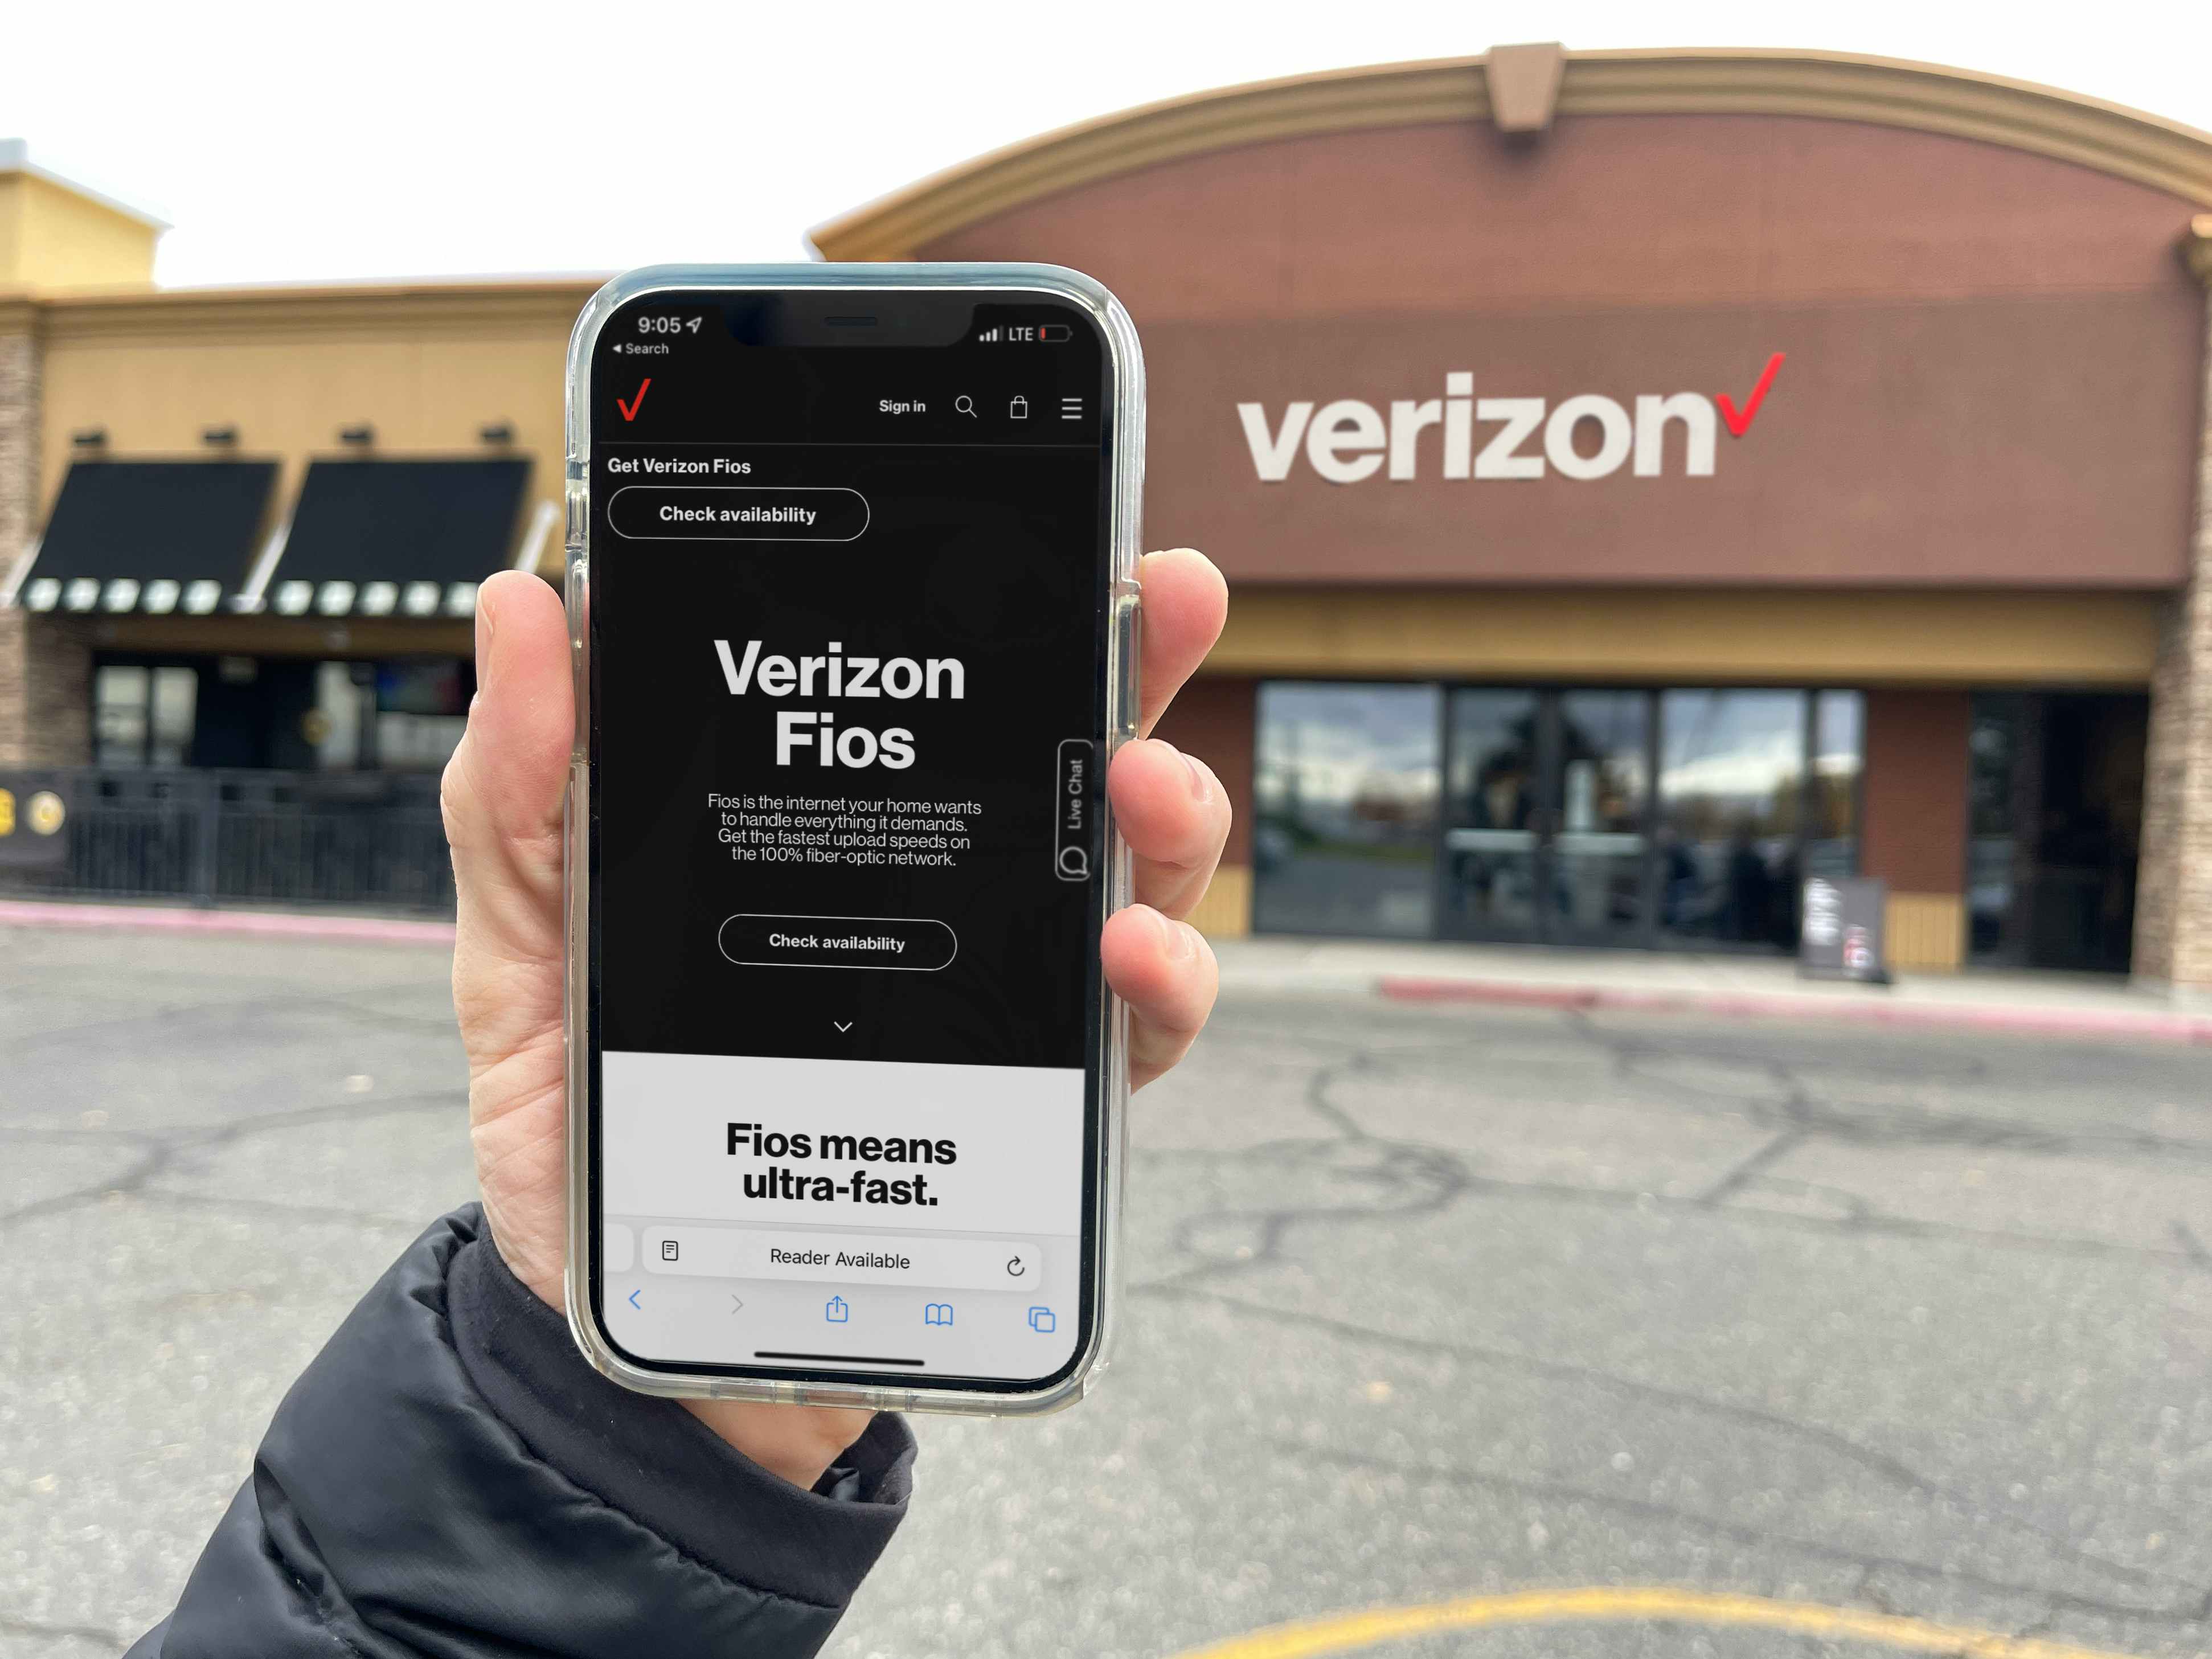 a hand holding a cellphone in front of verizon with verizon app fios on screen 